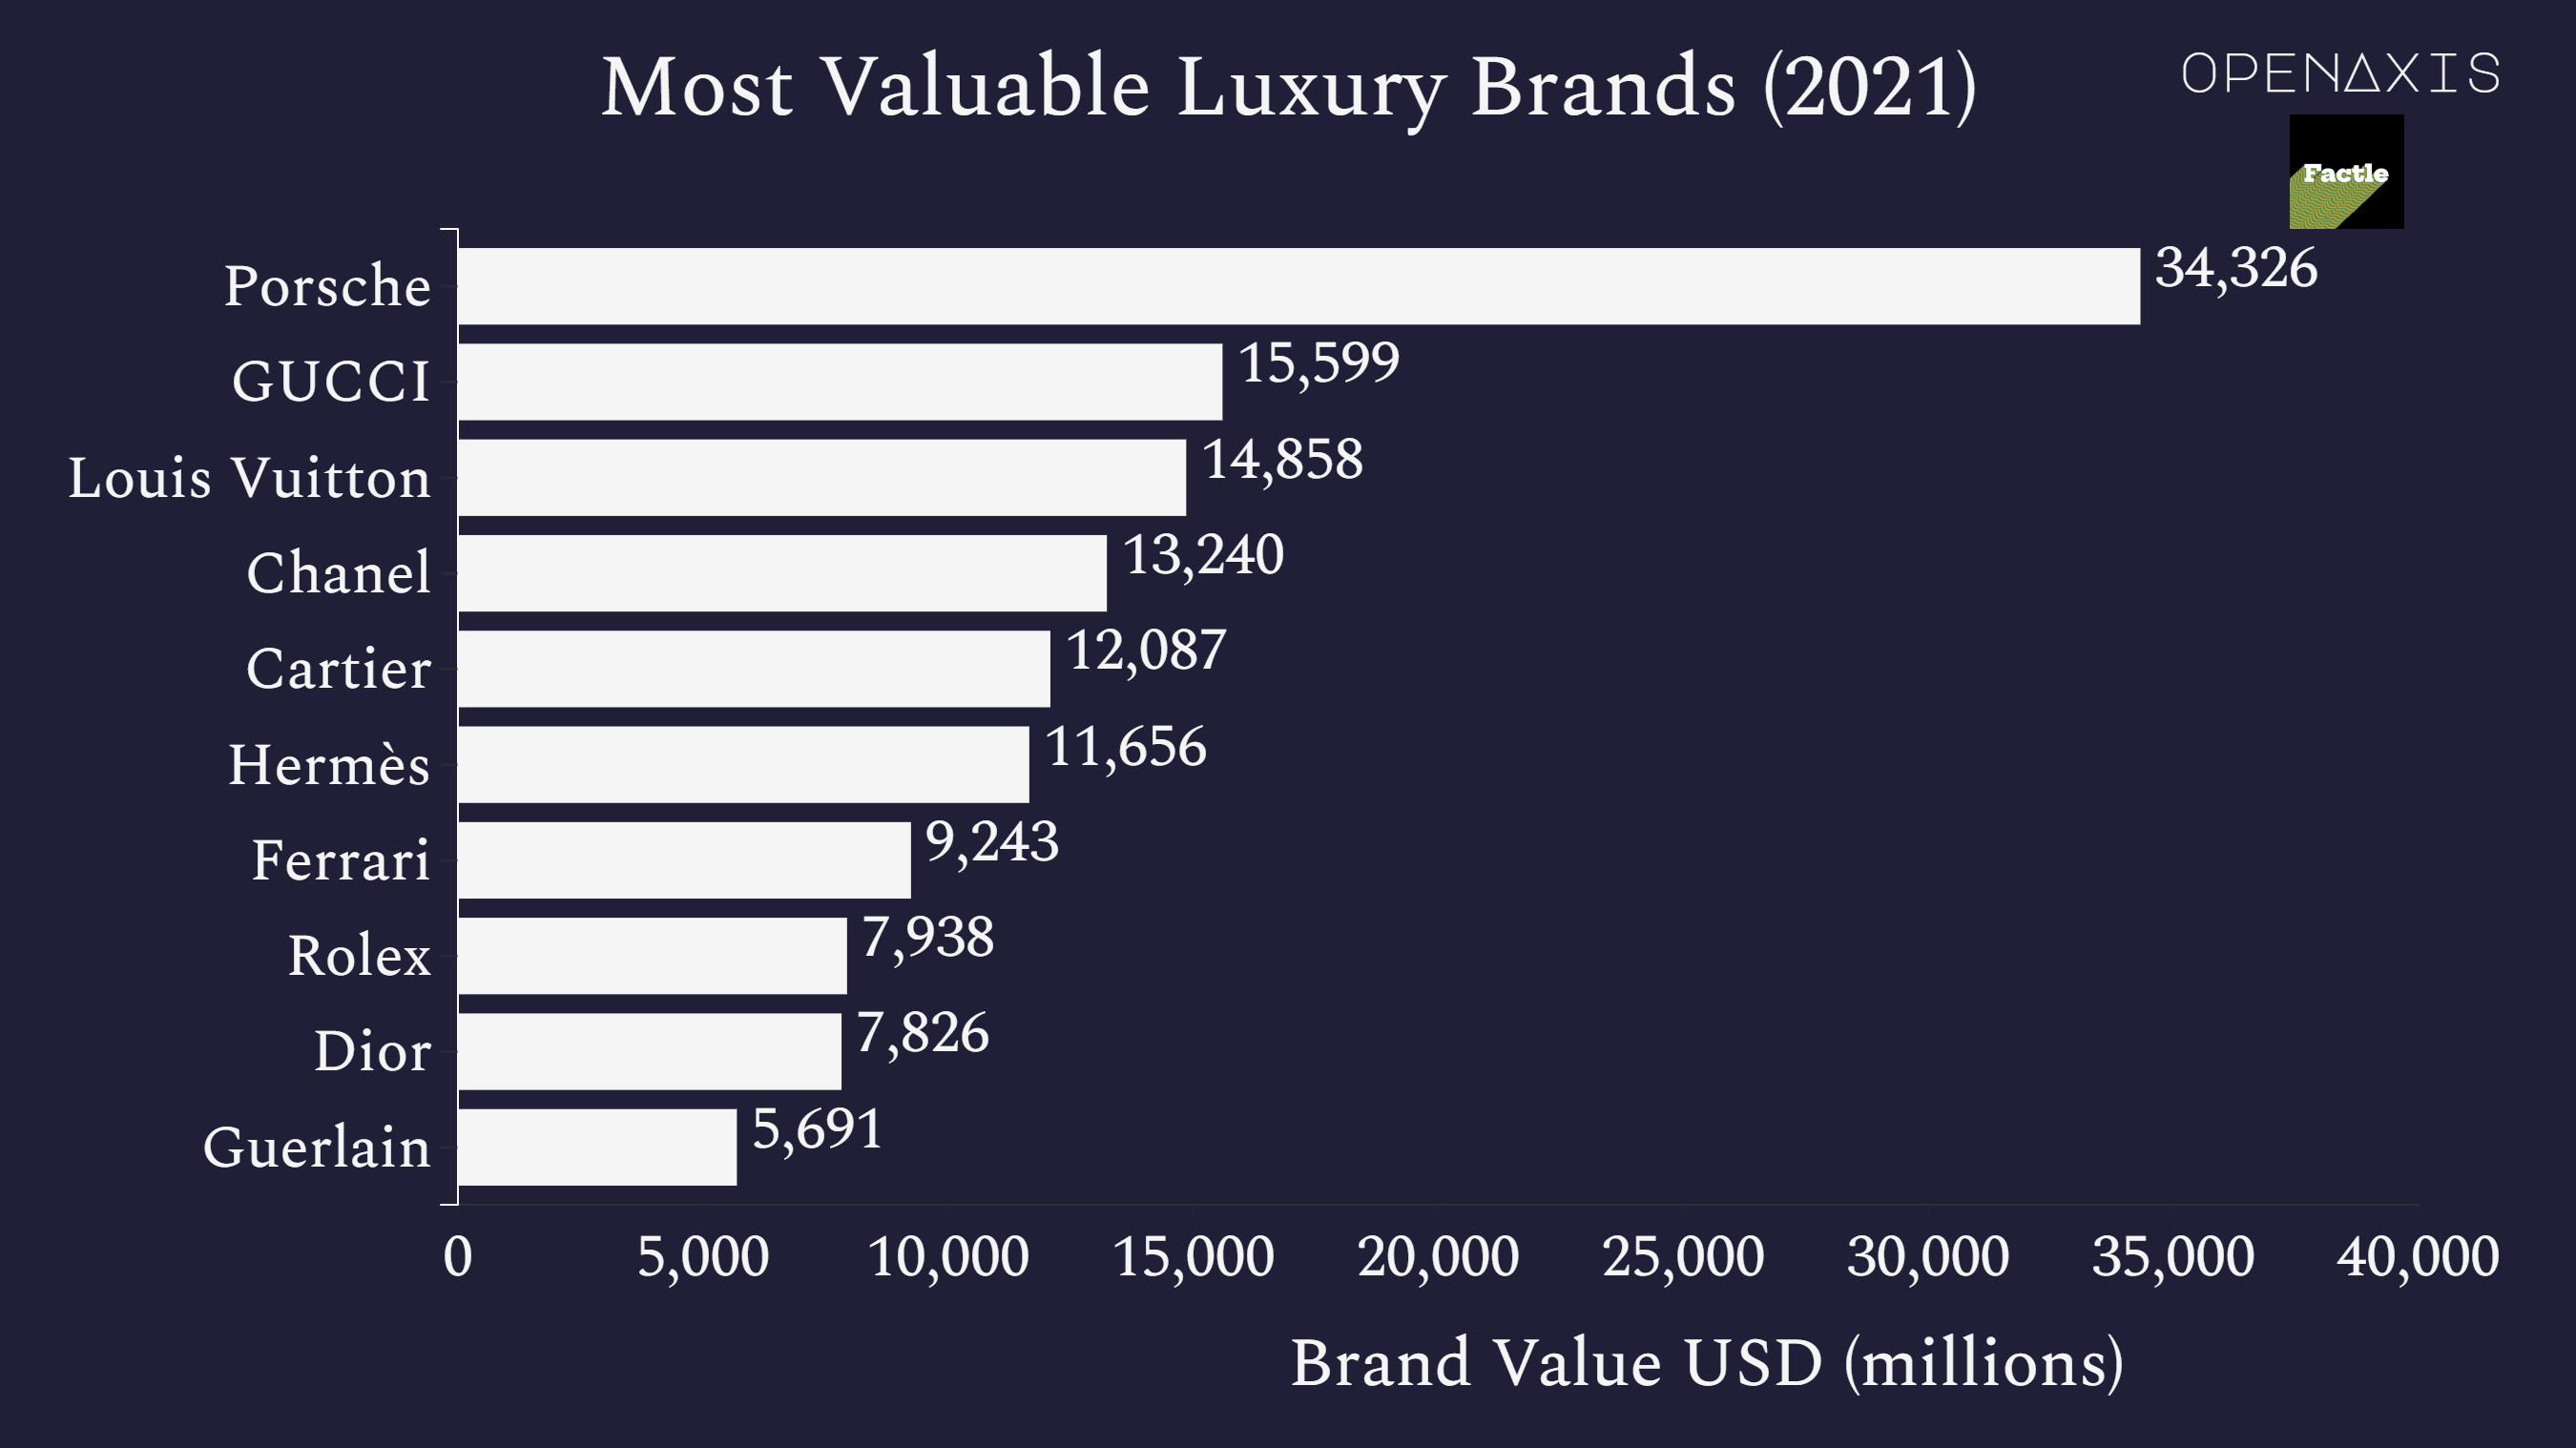 "Most Valuable Luxury Brands (2021)"